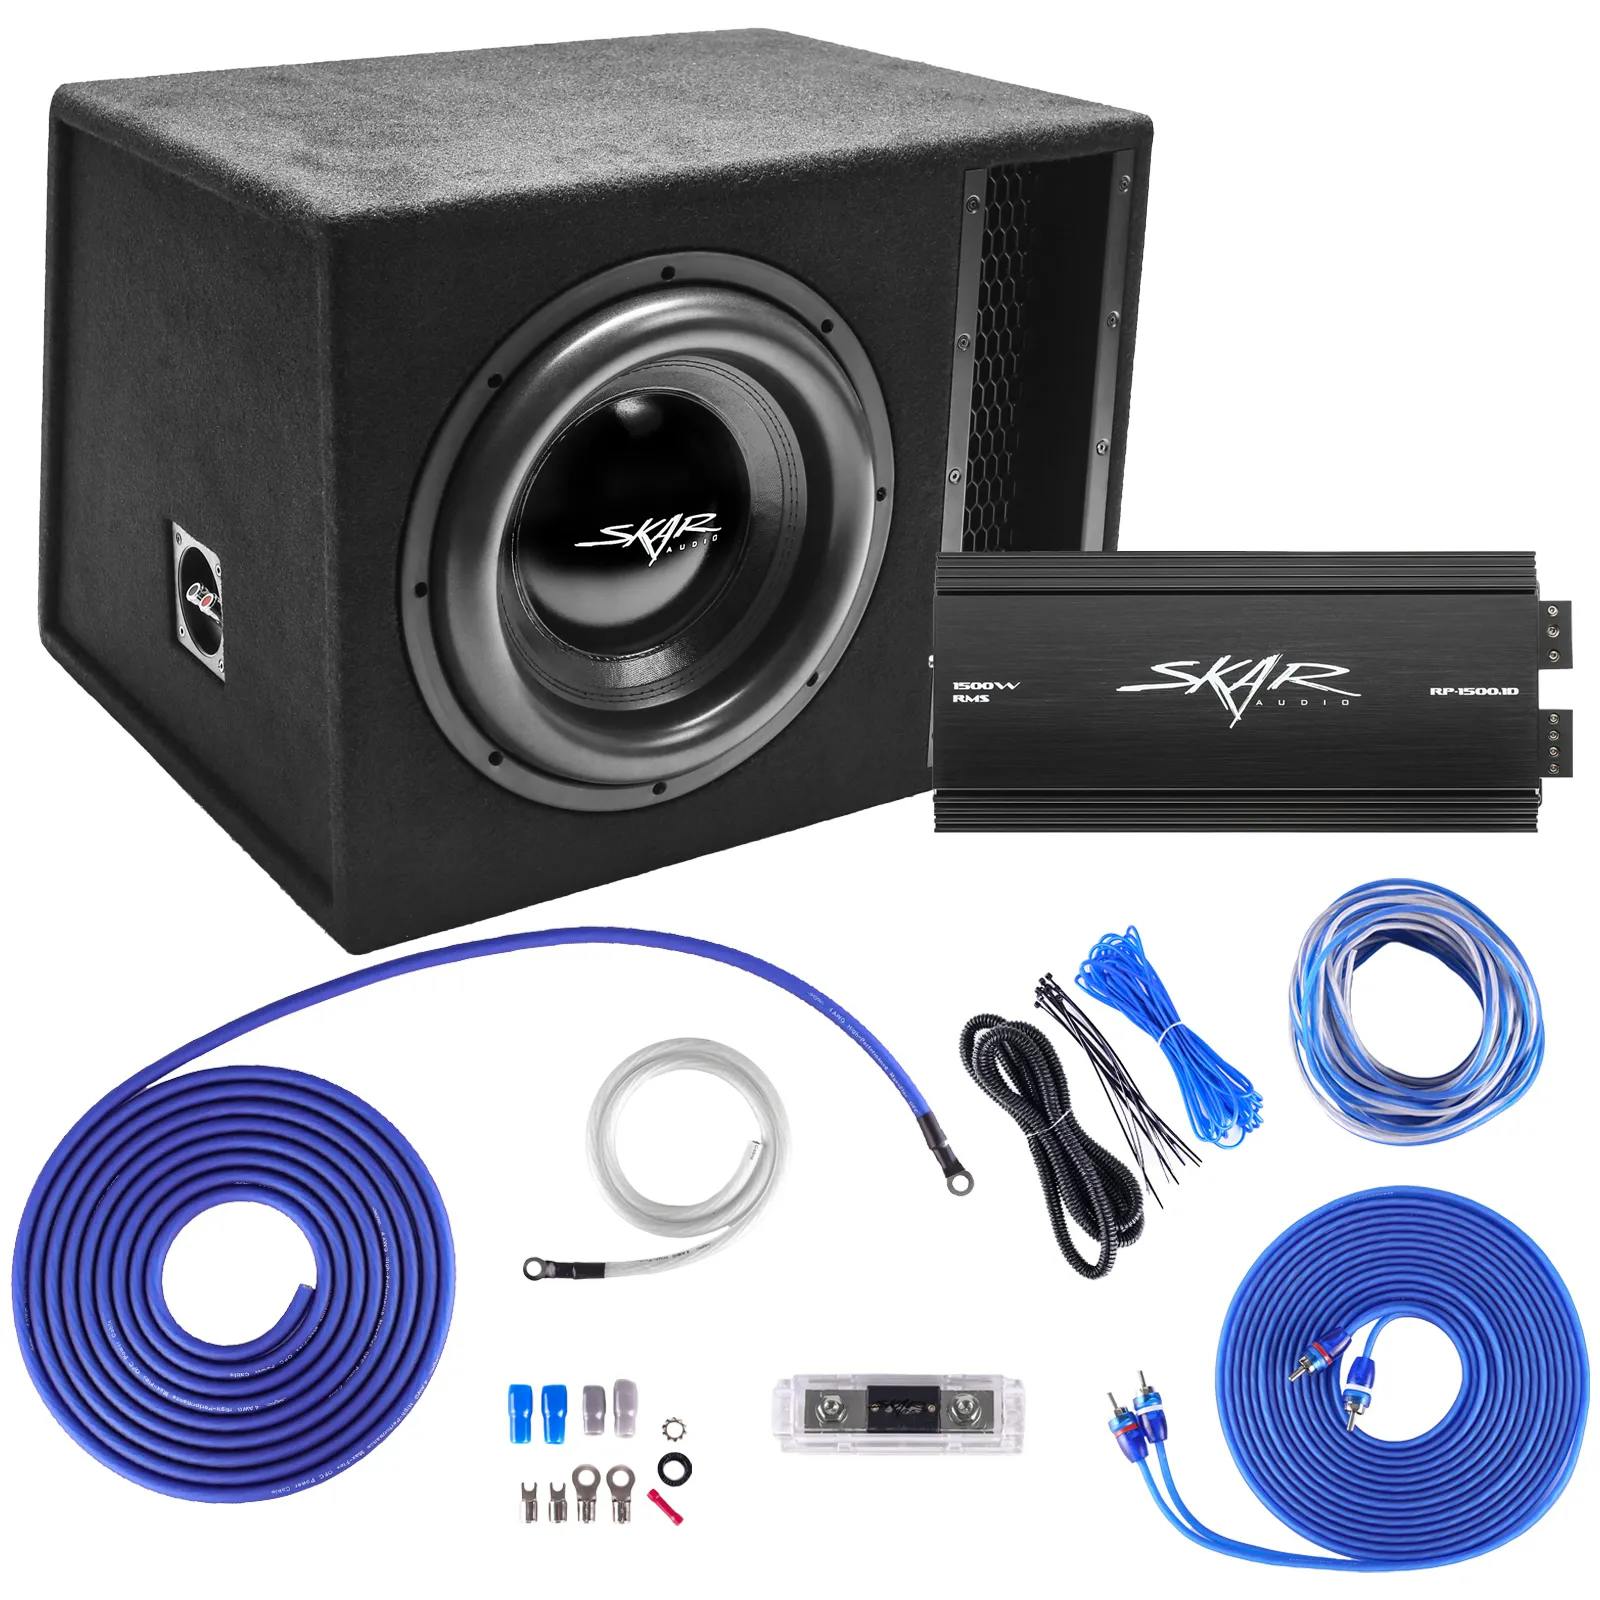 Featured Product Photo for Single 12" 2,500 Watt EVL Series Complete Subwoofer Package with Vented Enclosure and Amplifier